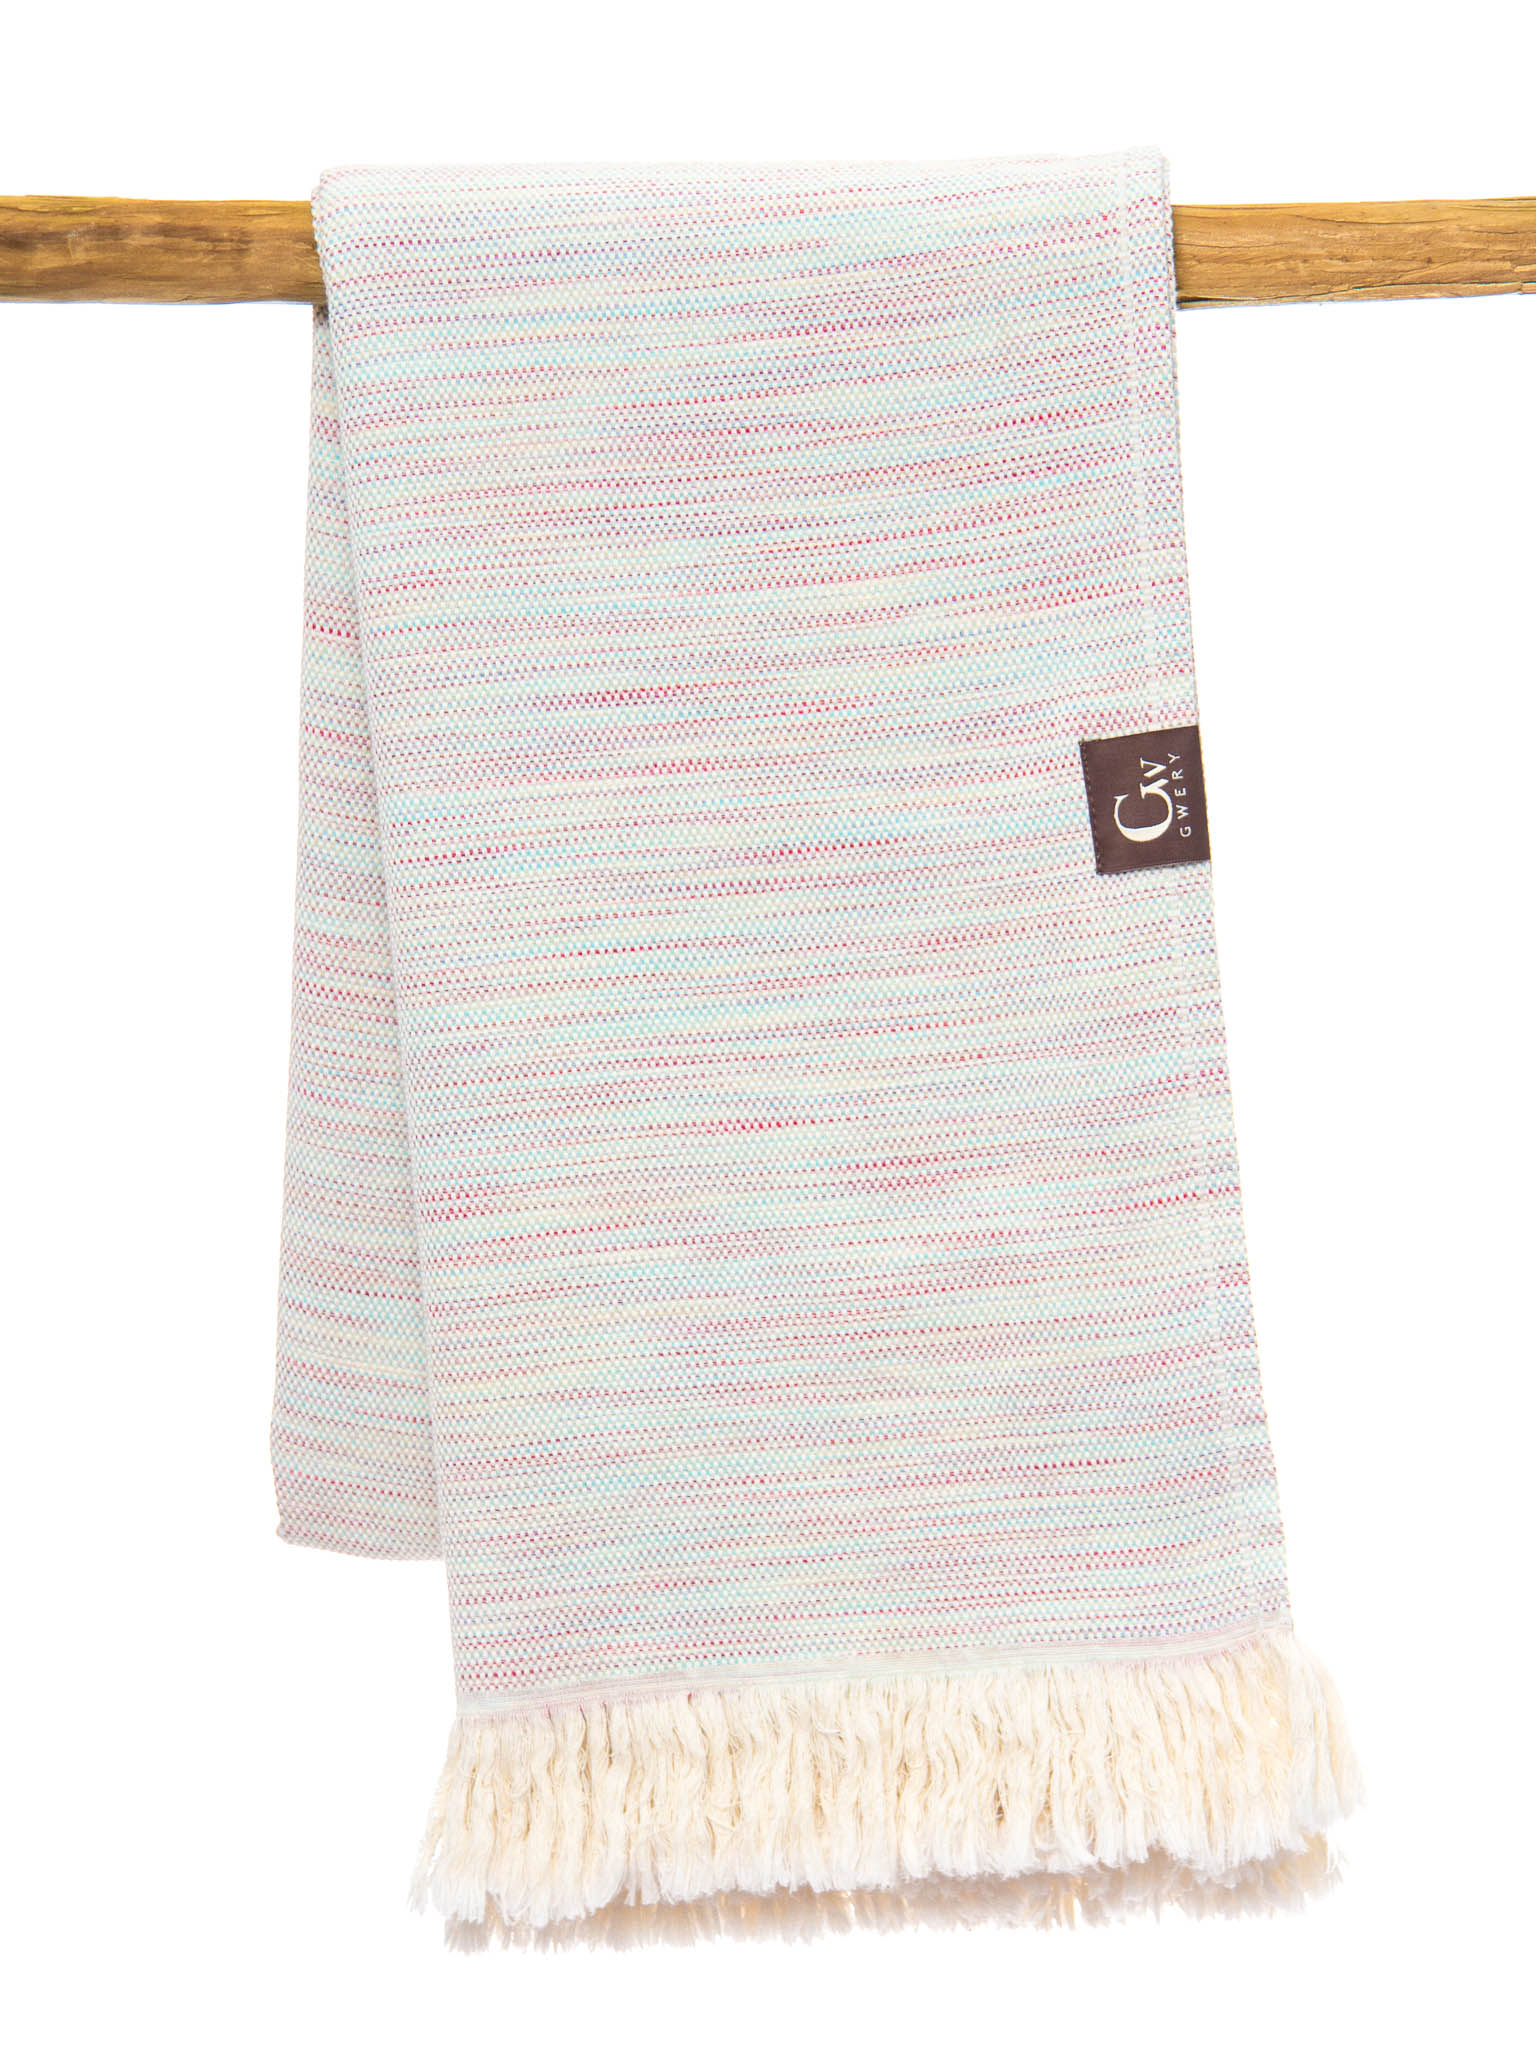 PINK PATTERNED FEATHER XL BEACH TOWEL